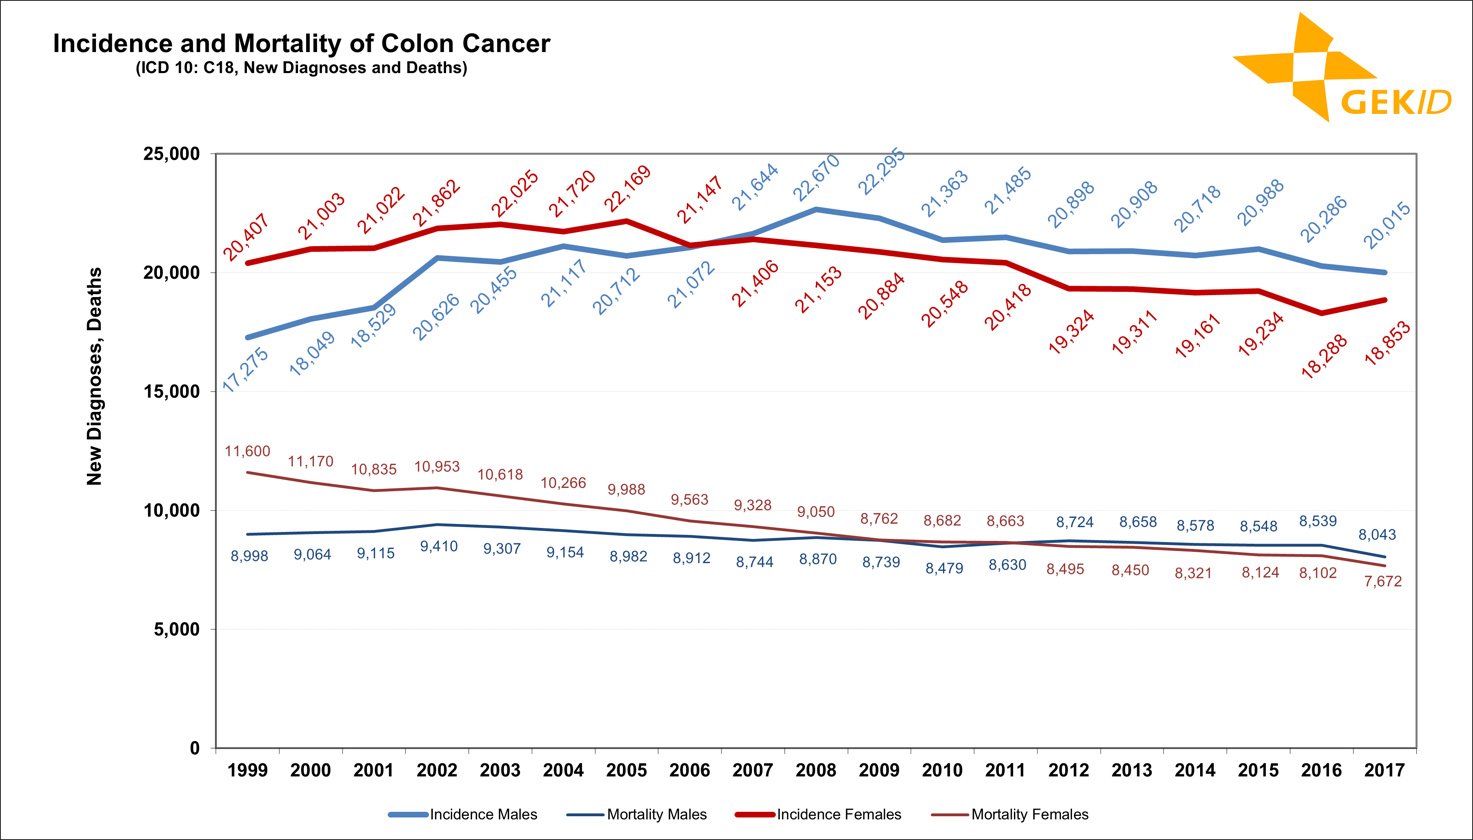 Estimated incidence and mortality of malignant neoplasms of the colon (ICD 10: C18) in Germany - number of cases